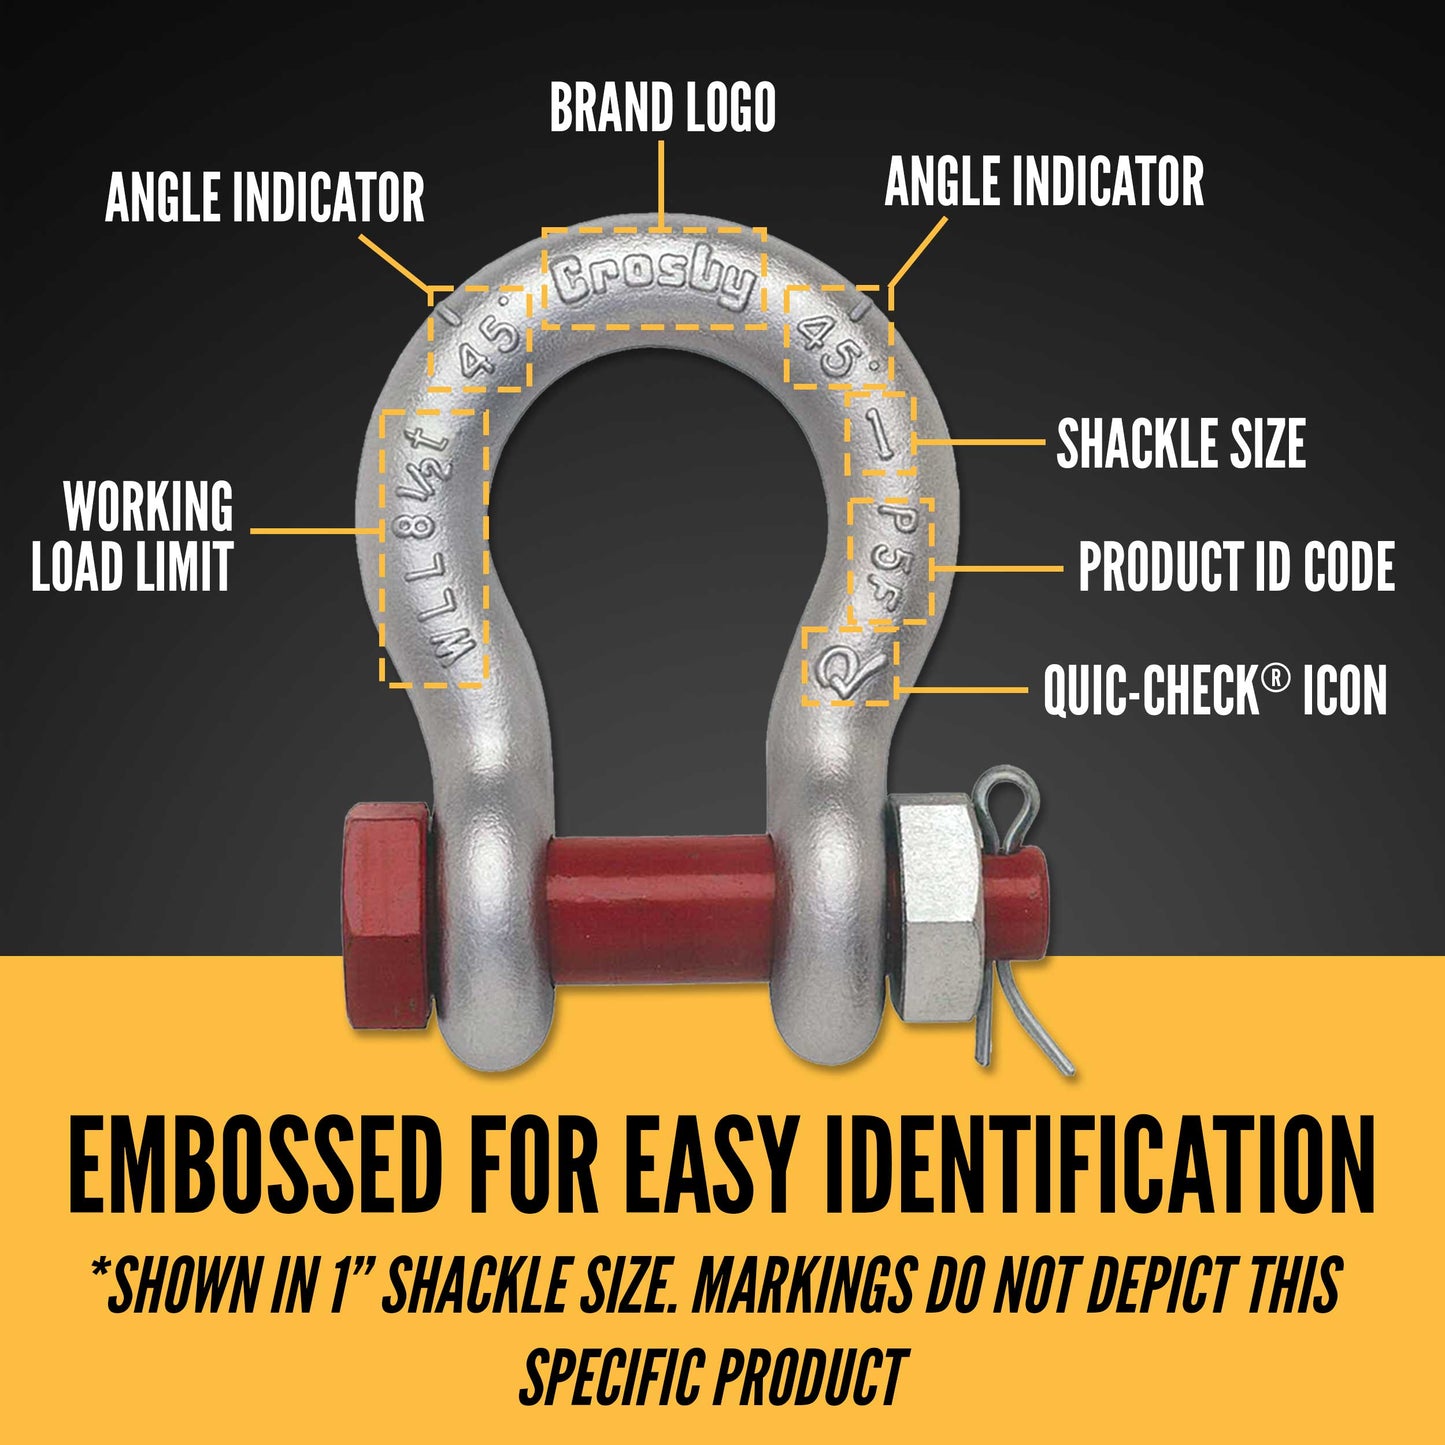 3/16" Crosby® Bolt Type Anchor Shackle | G-2130 - 0.33 Ton embossed for easy identification